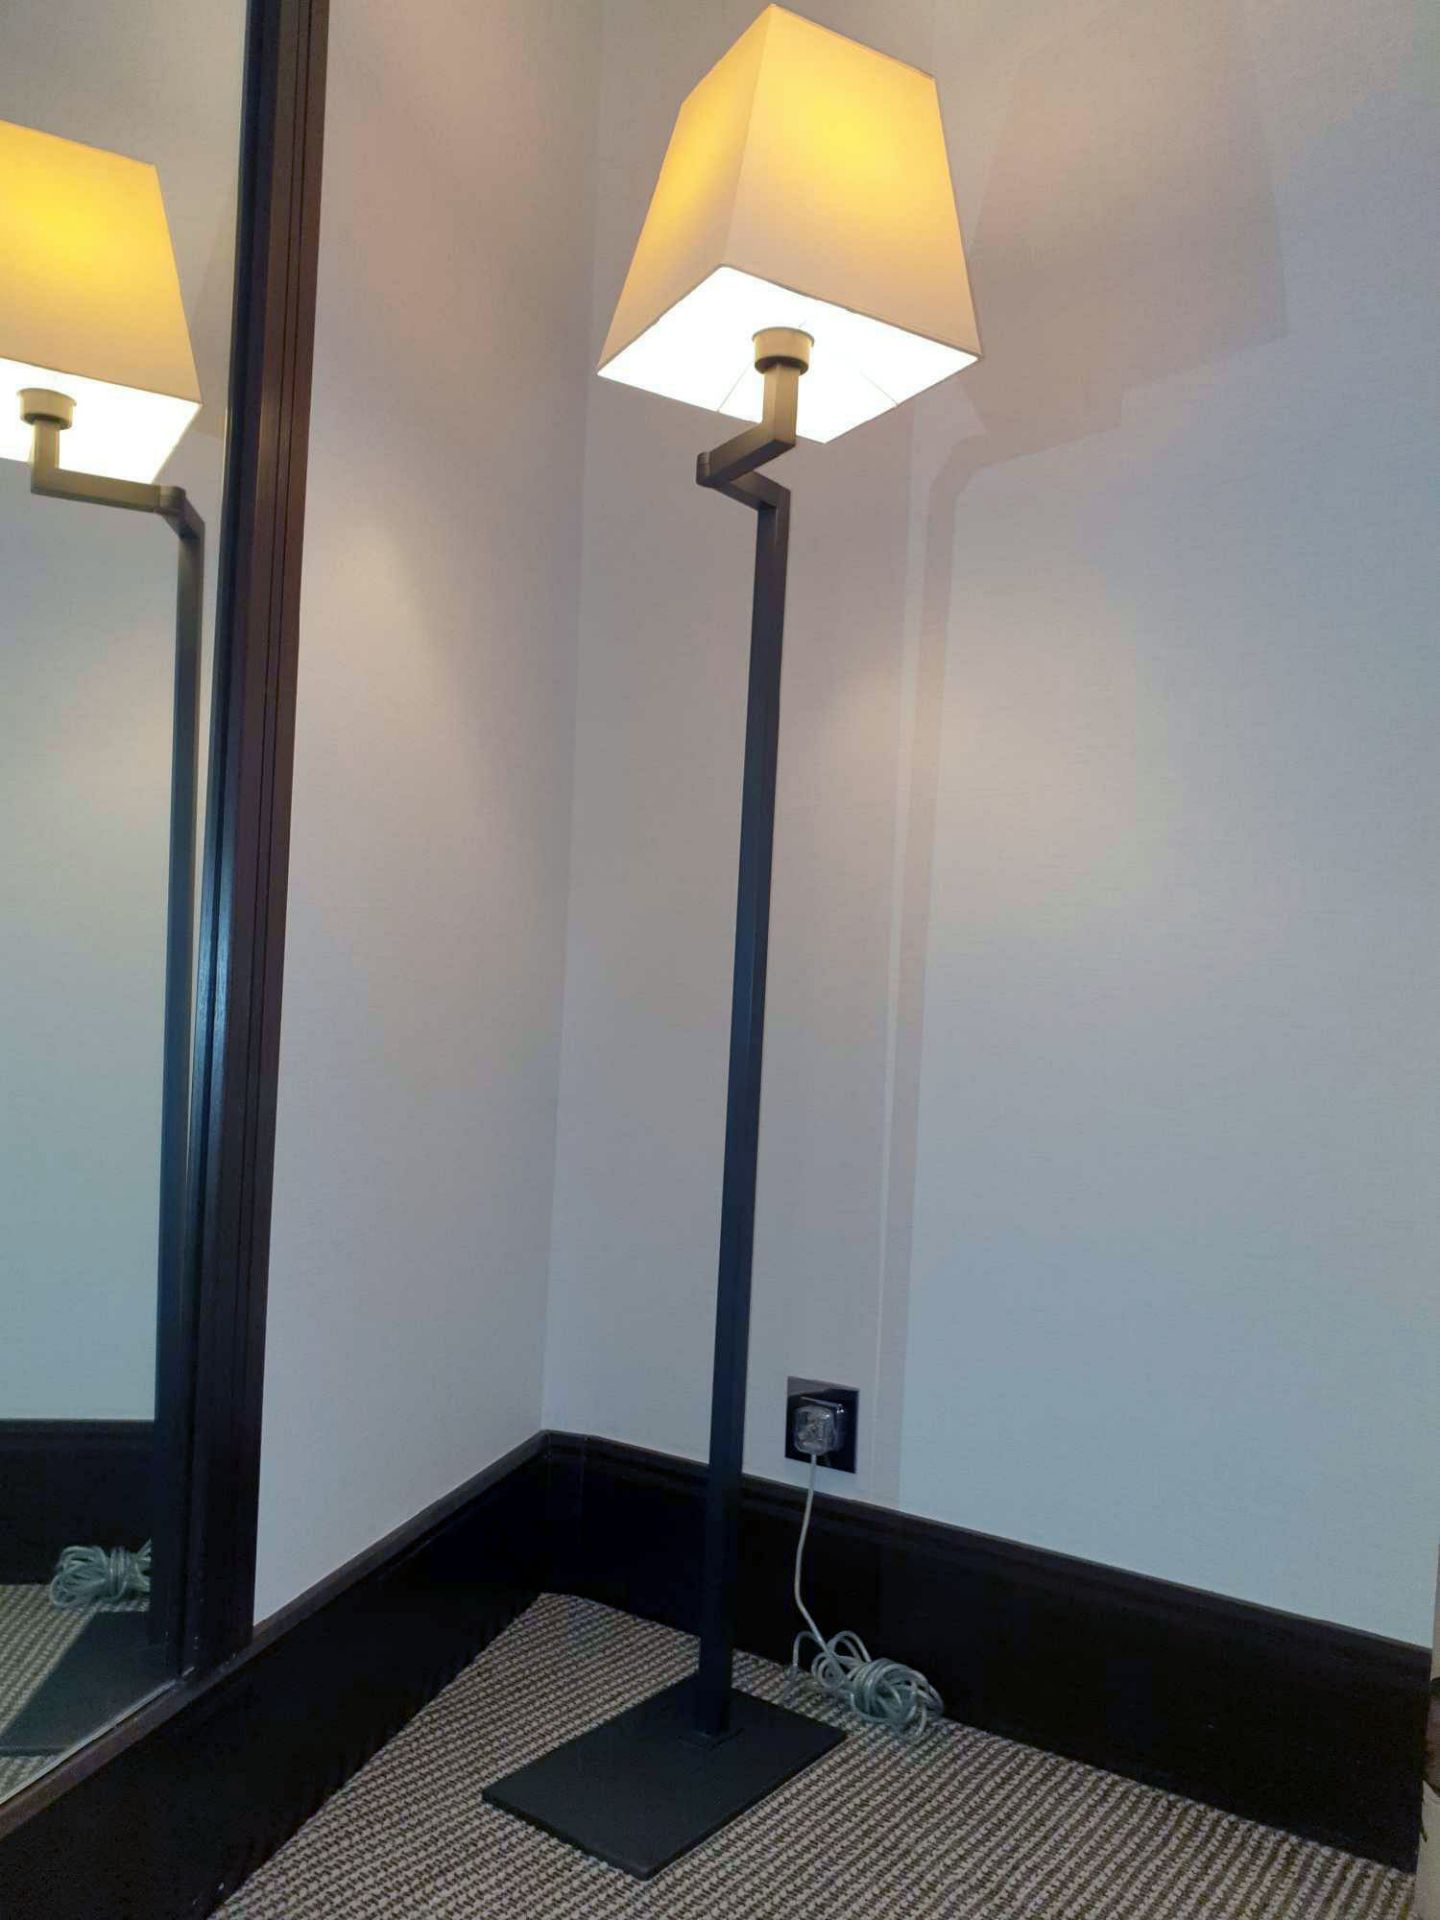 A pair of Sifra Floor Lamps Model LMS 600 ENG Metal Base With Single Arm Single Bulb Complete With - Image 2 of 2